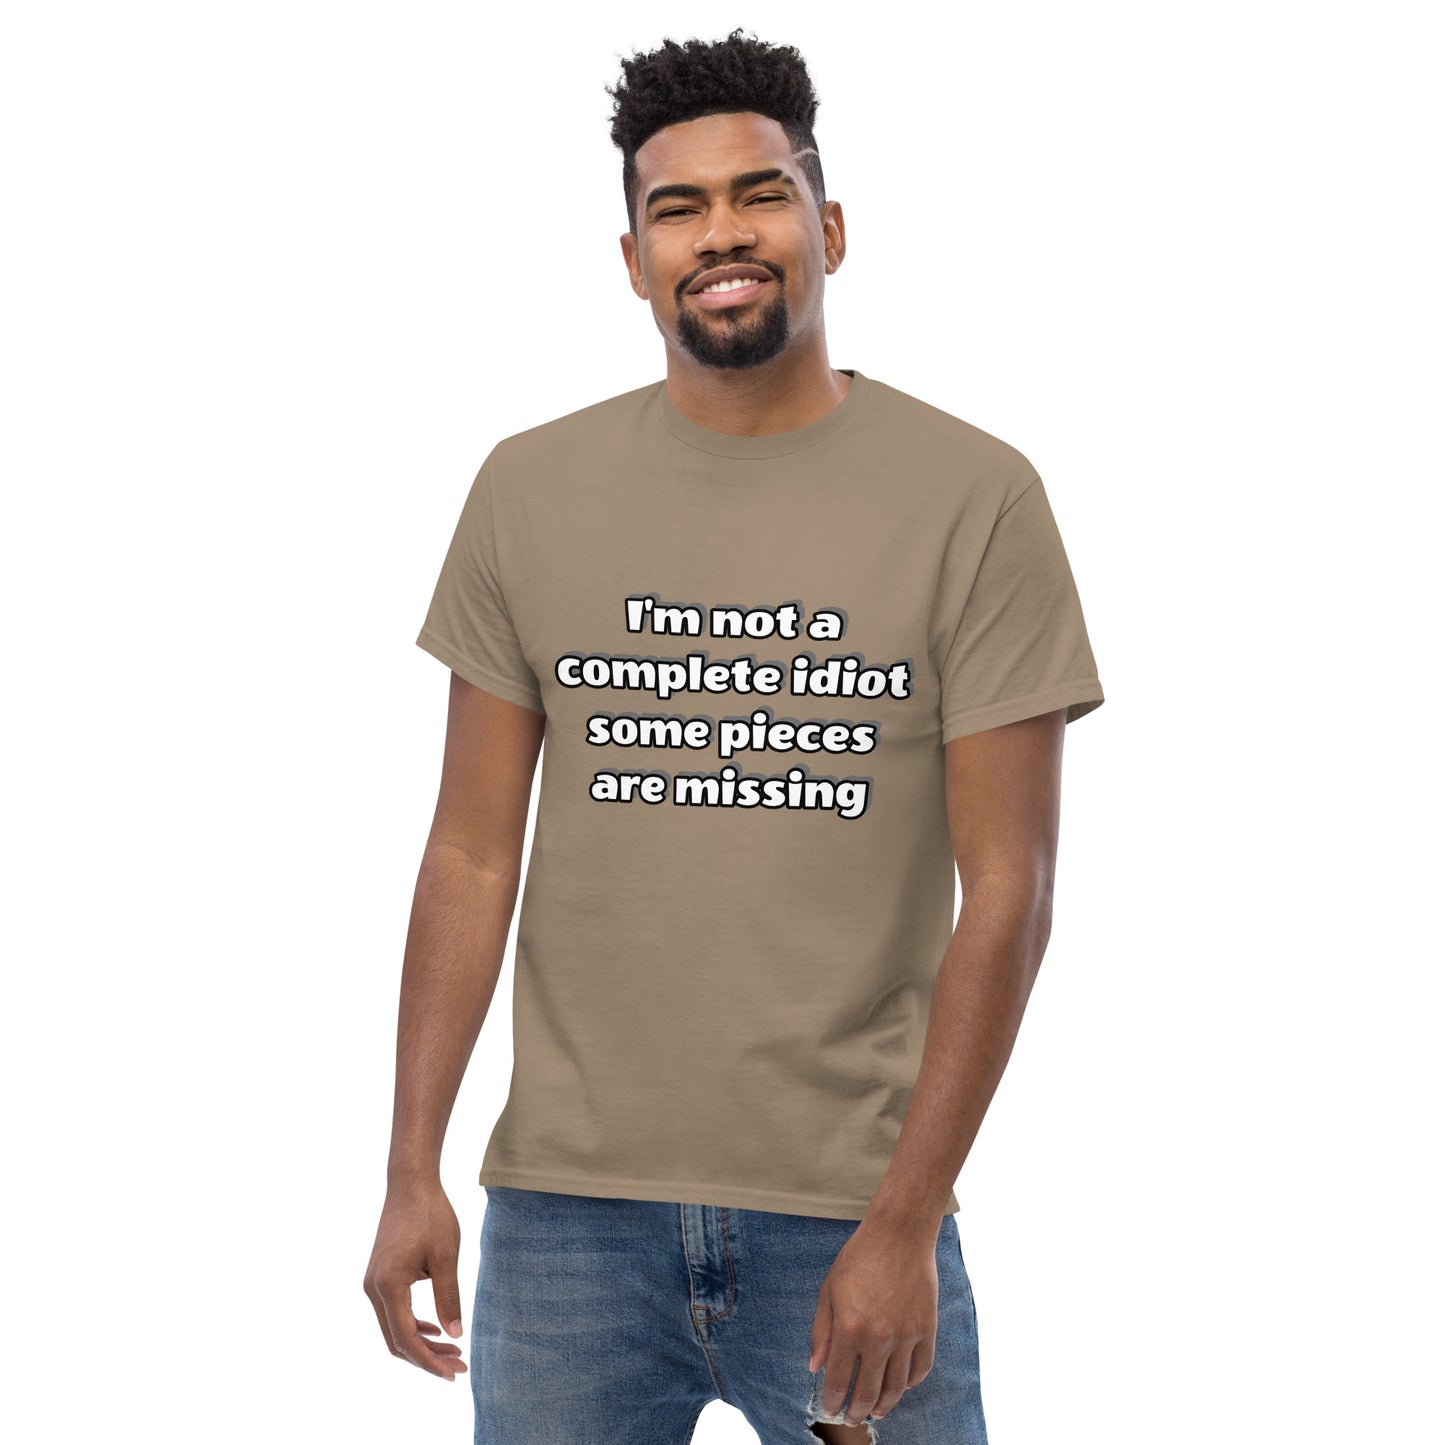 Men with brown t-shirt with text “I’m not a complete idiot, some pieces are missing”